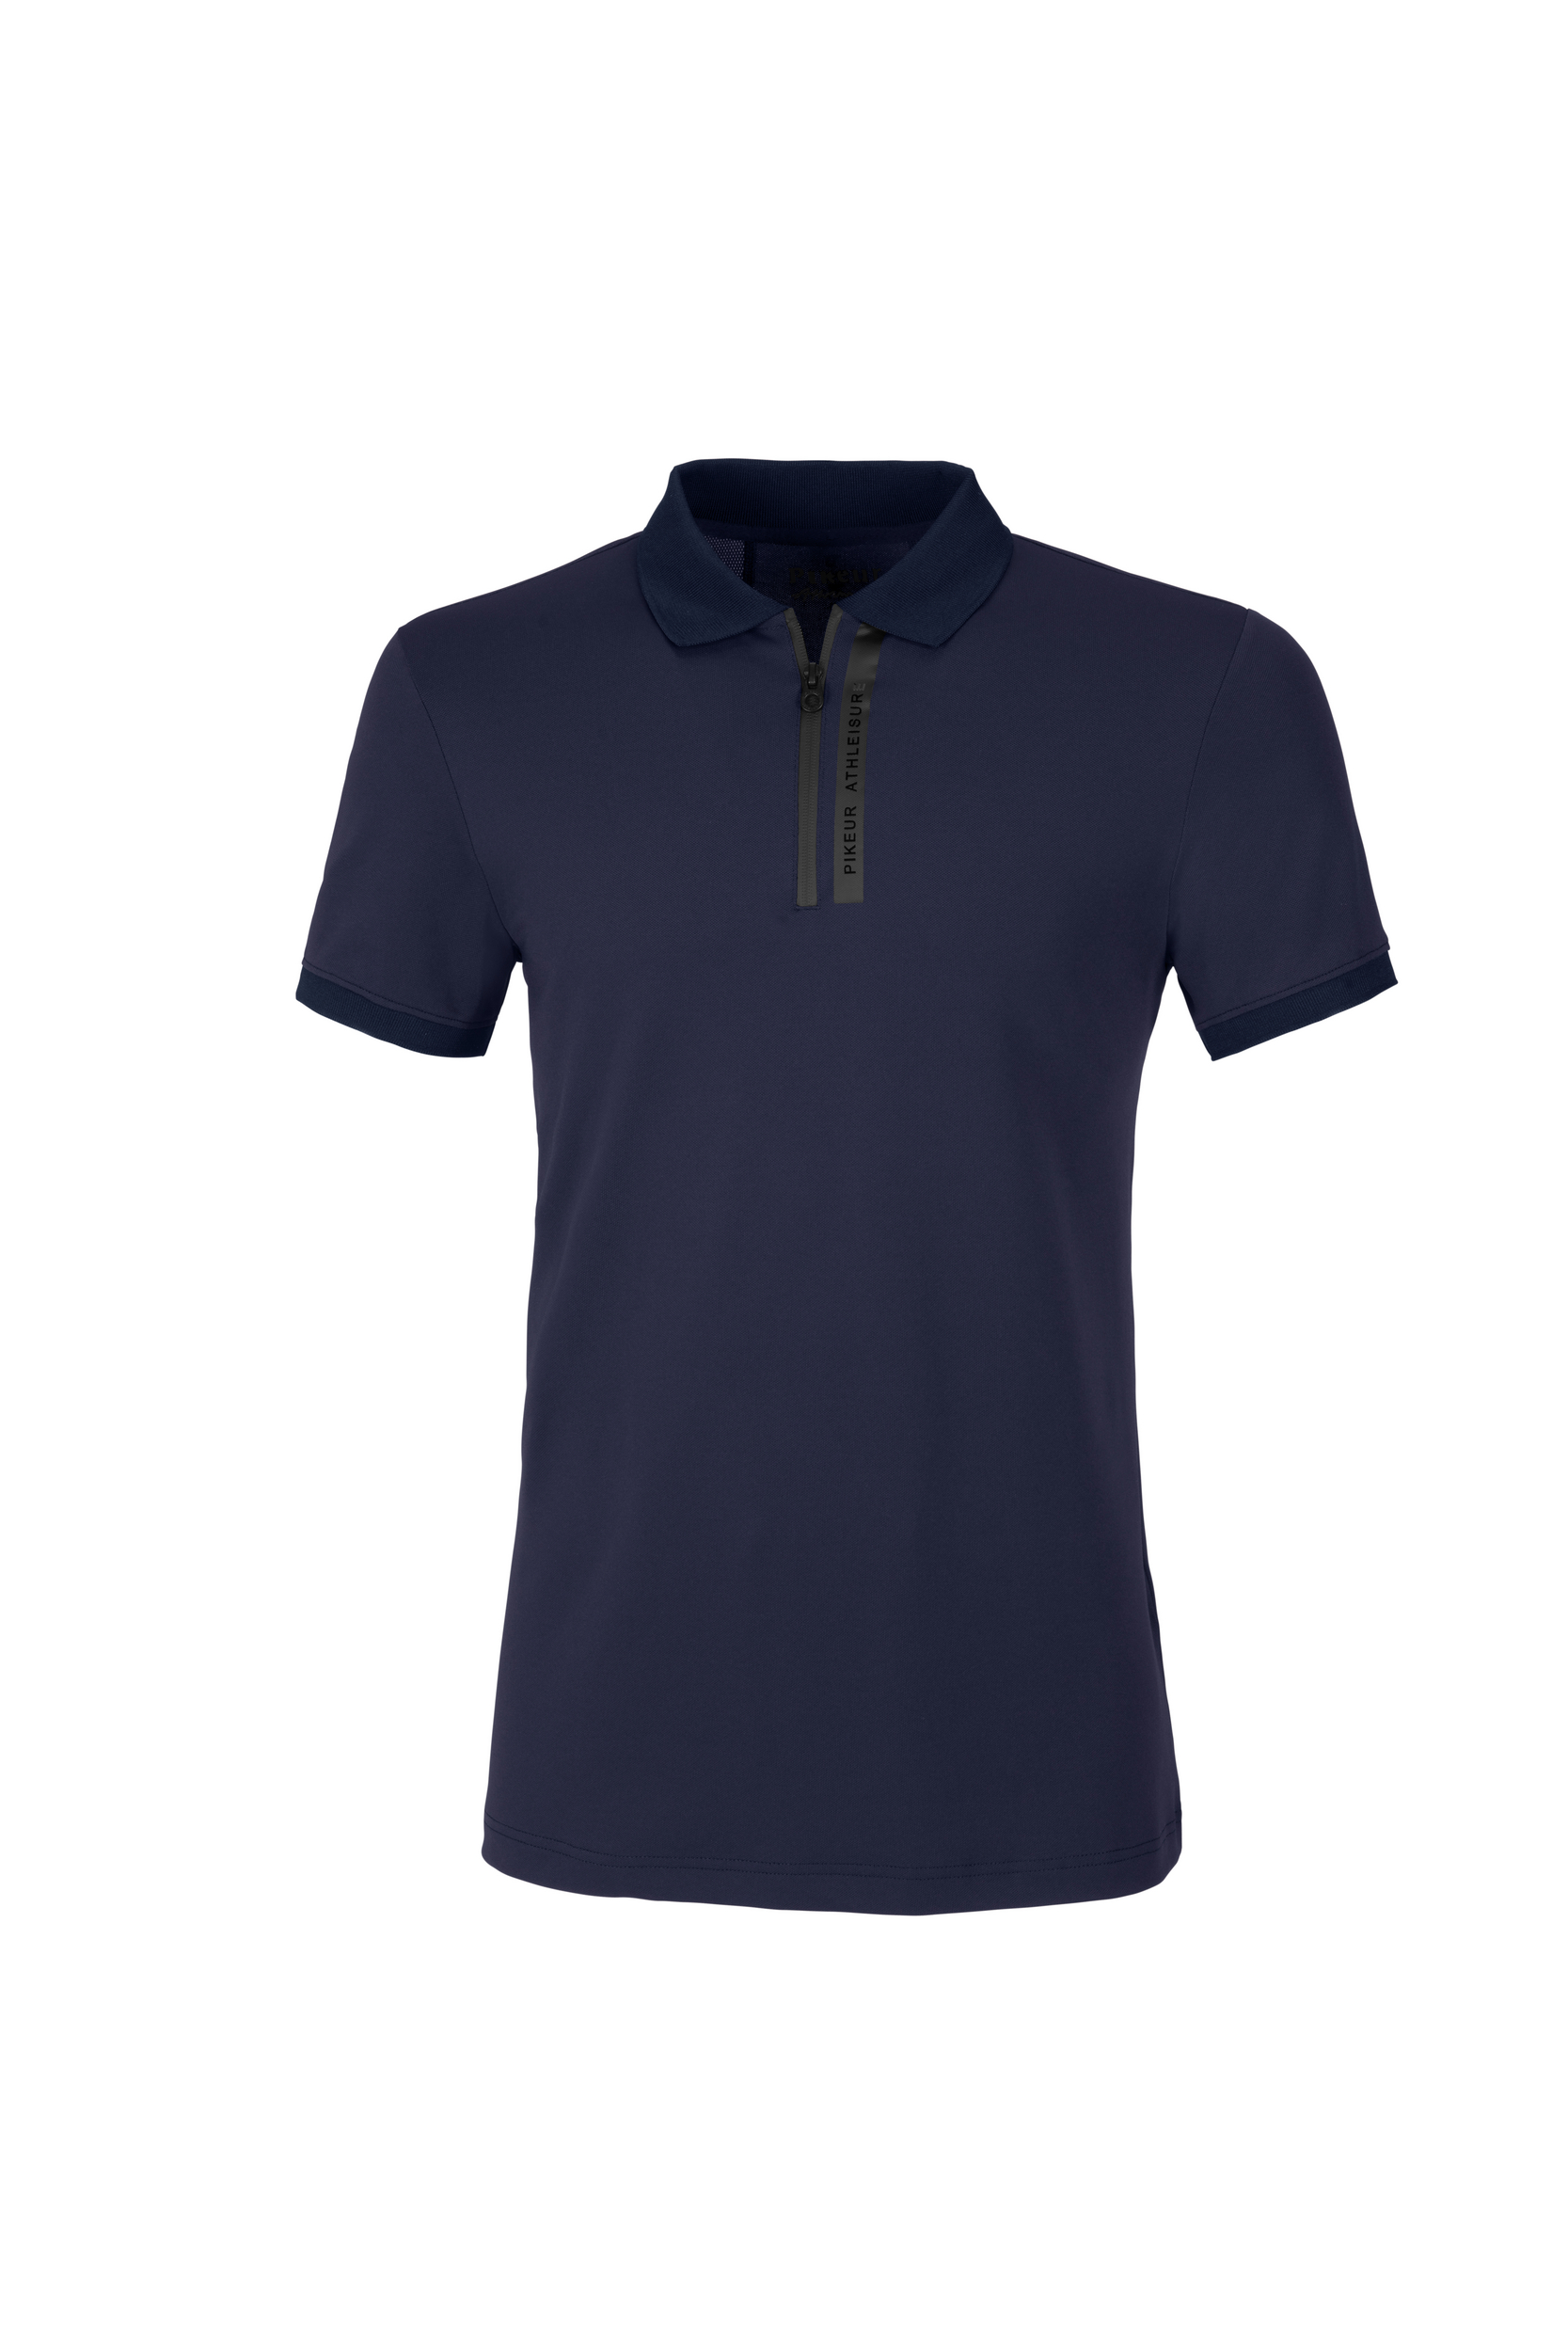 PIKEUR Herren Funktions Polo Shirt Ole - navy - M - 2